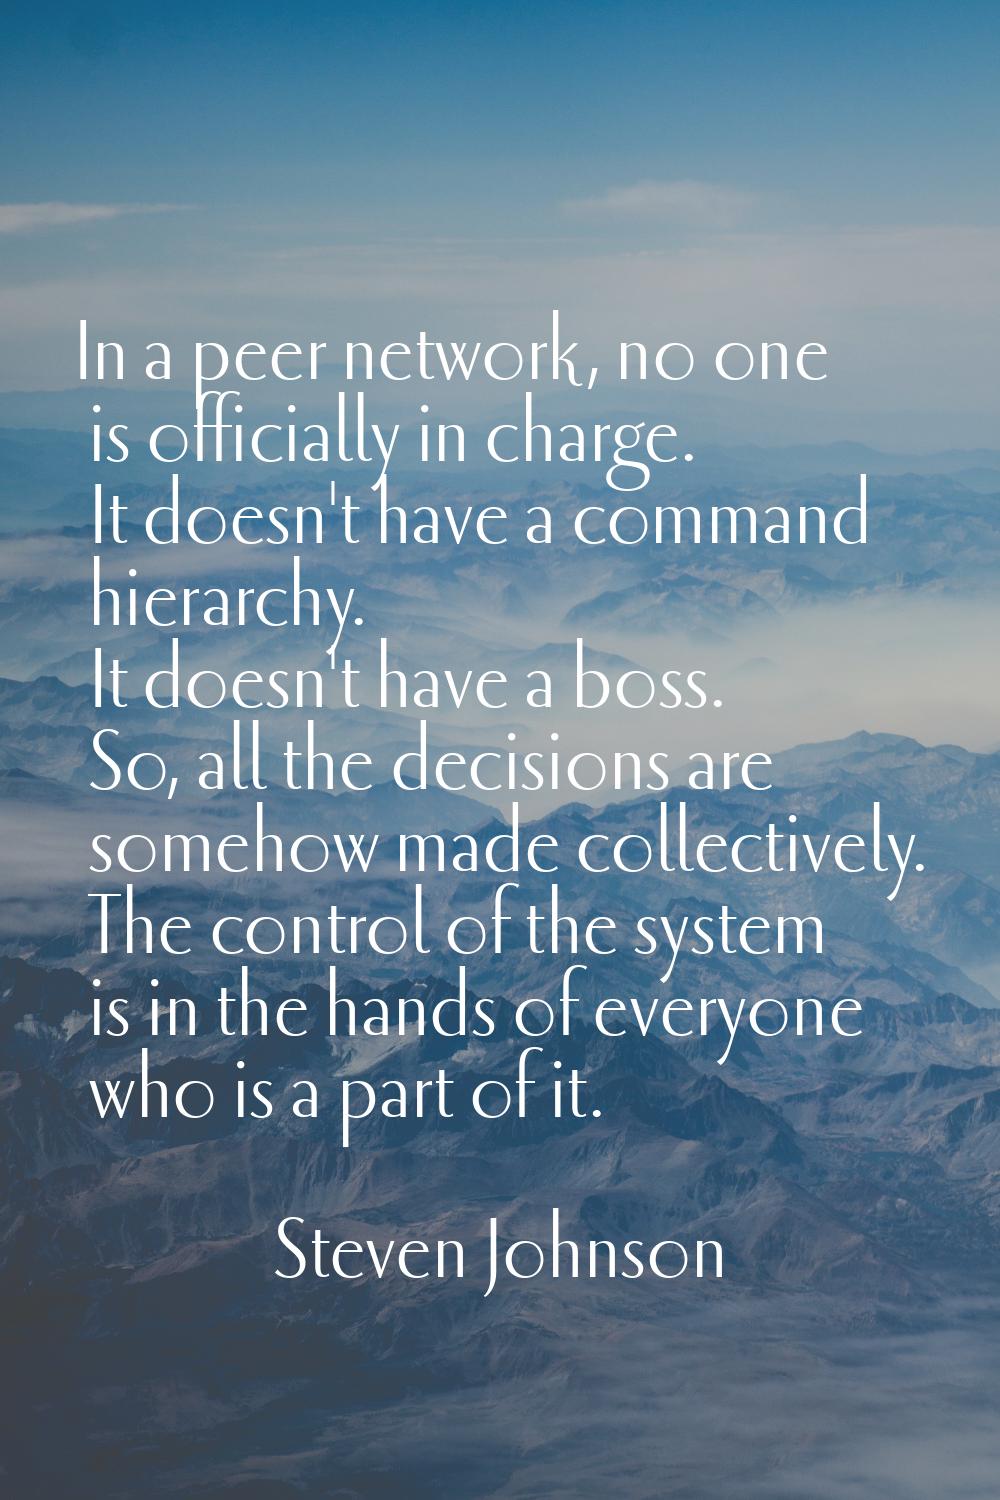 In a peer network, no one is officially in charge. It doesn't have a command hierarchy. It doesn't 